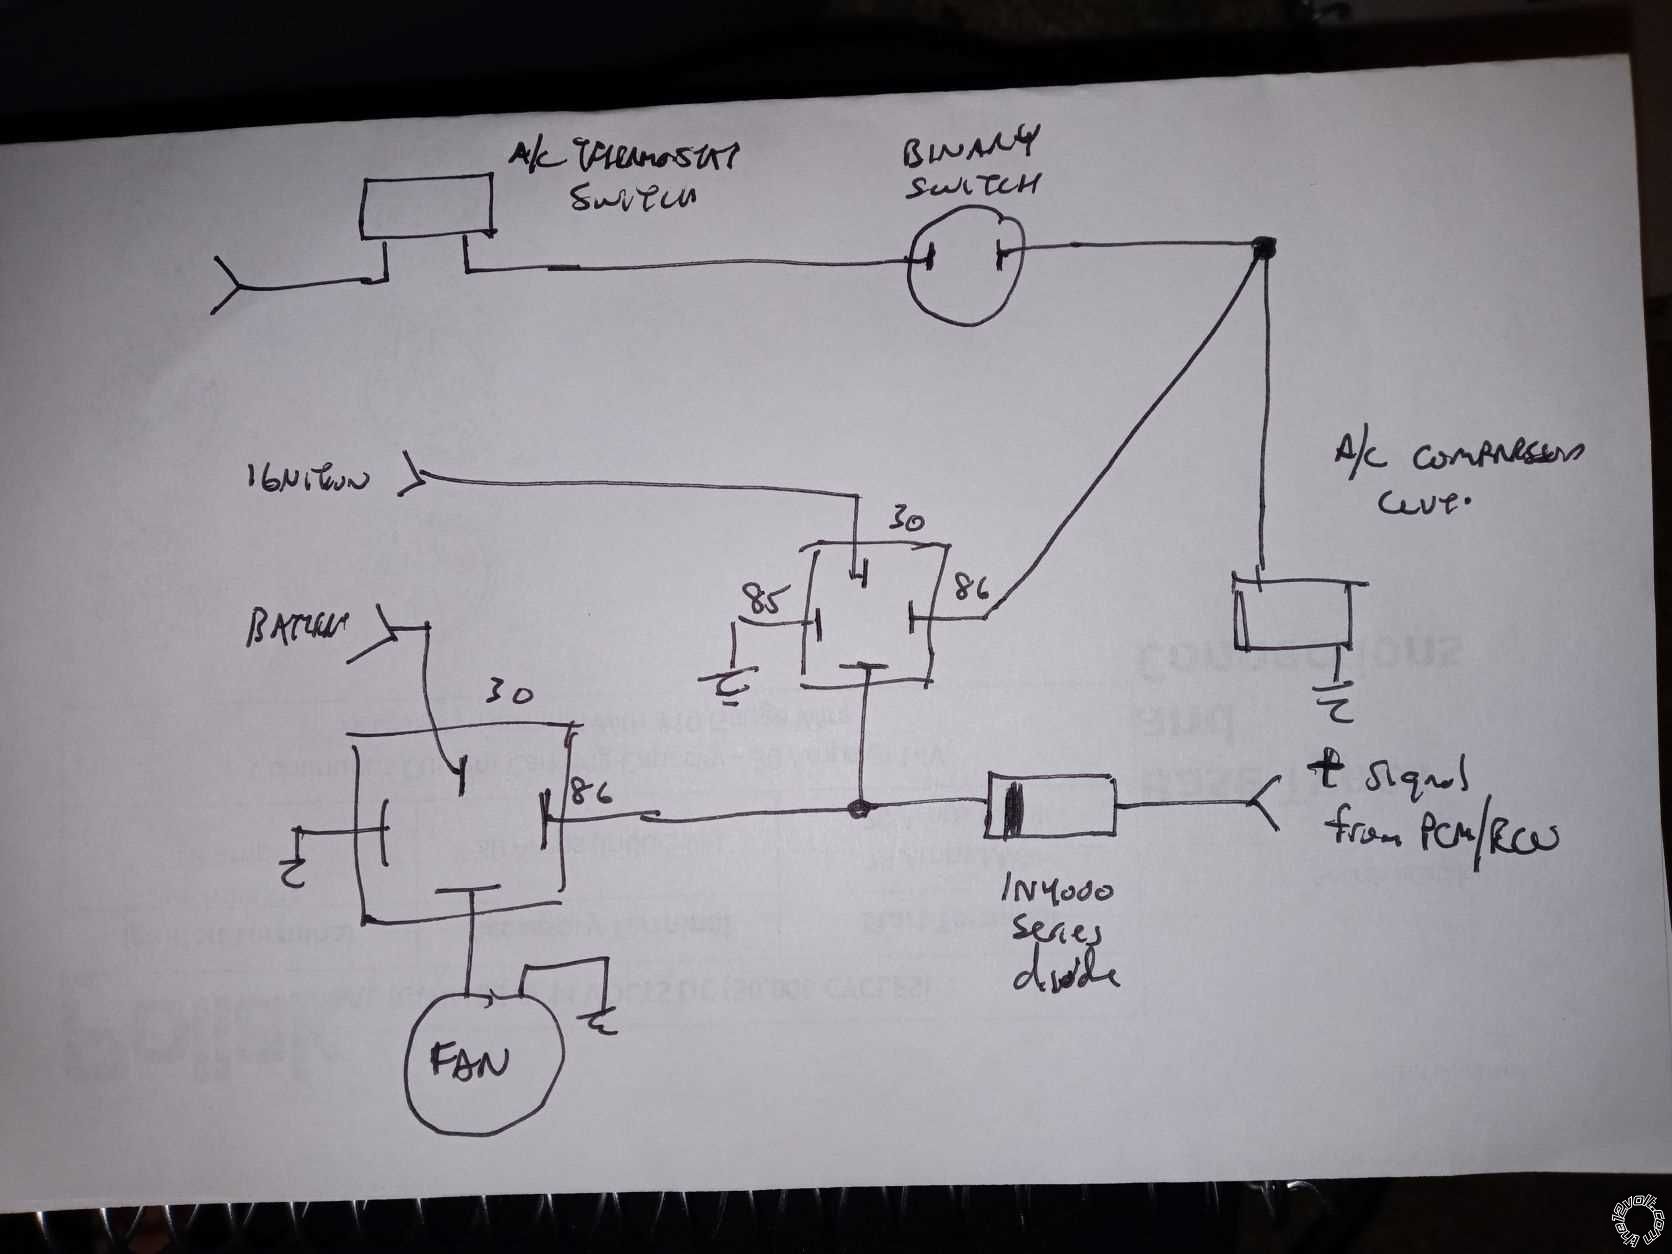 A/C Cooling Fan Circuit For Dummies Like Me -- posted image.